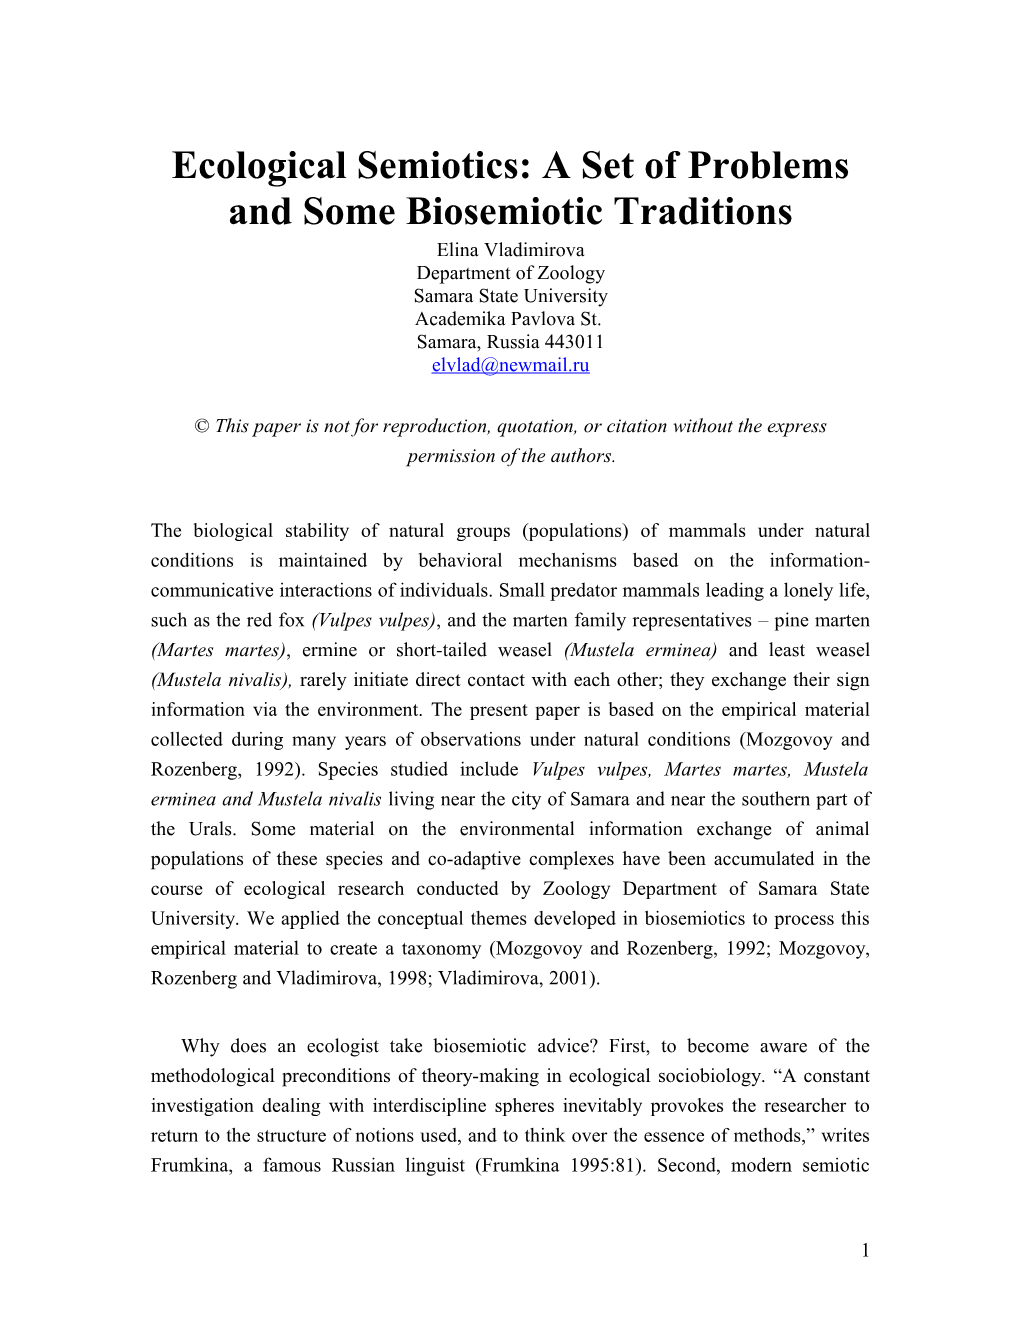 Ecological Semiotics Set of Problems and Some Biosemiotic Traditions